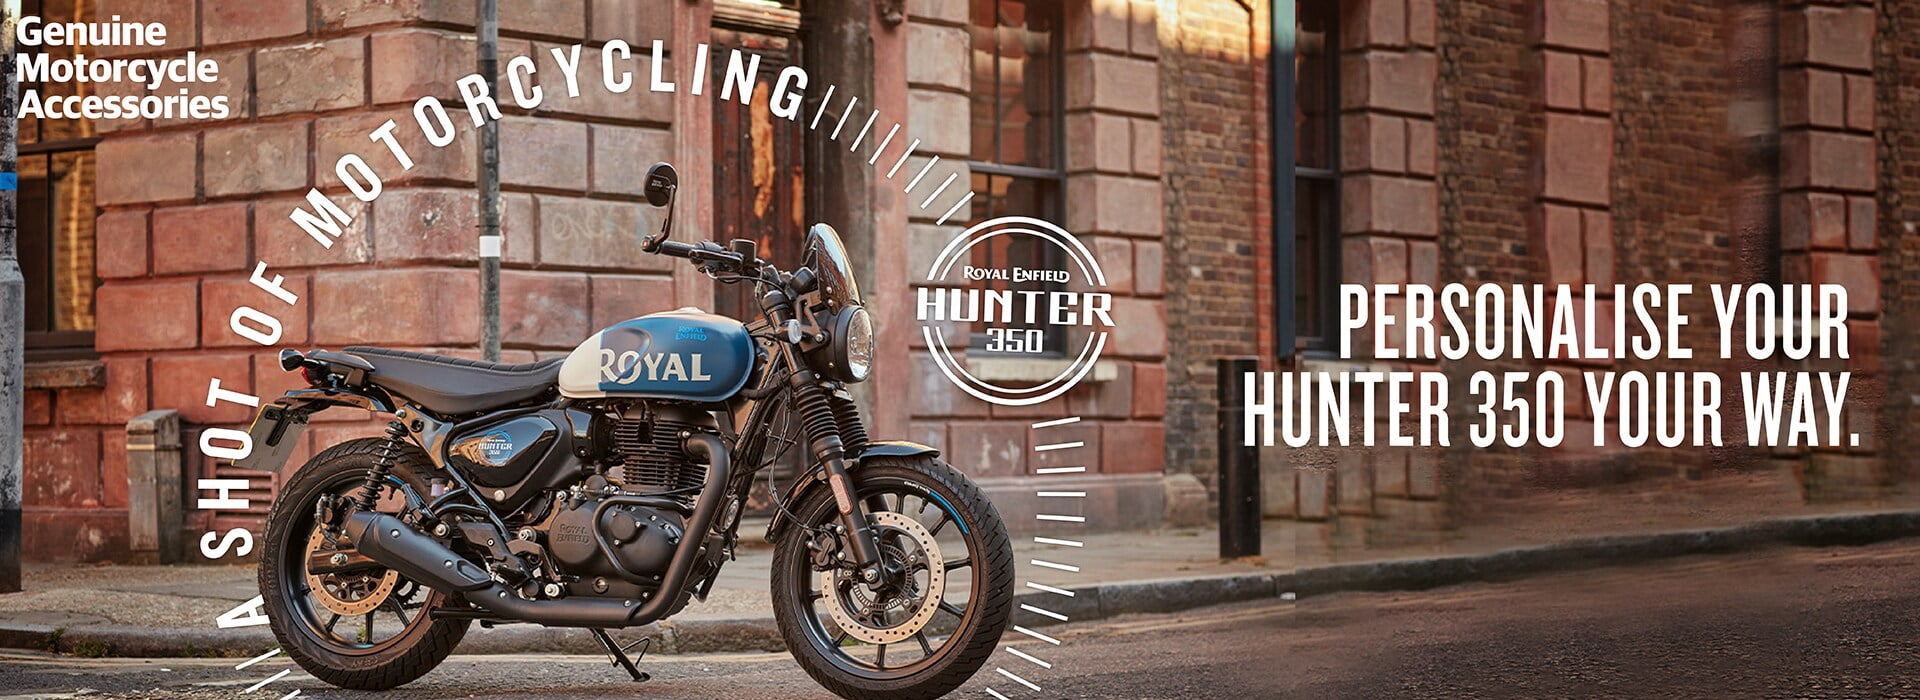 Royal Enfield Hunter 350 Launched - Old Soul With A Young Heart (3)